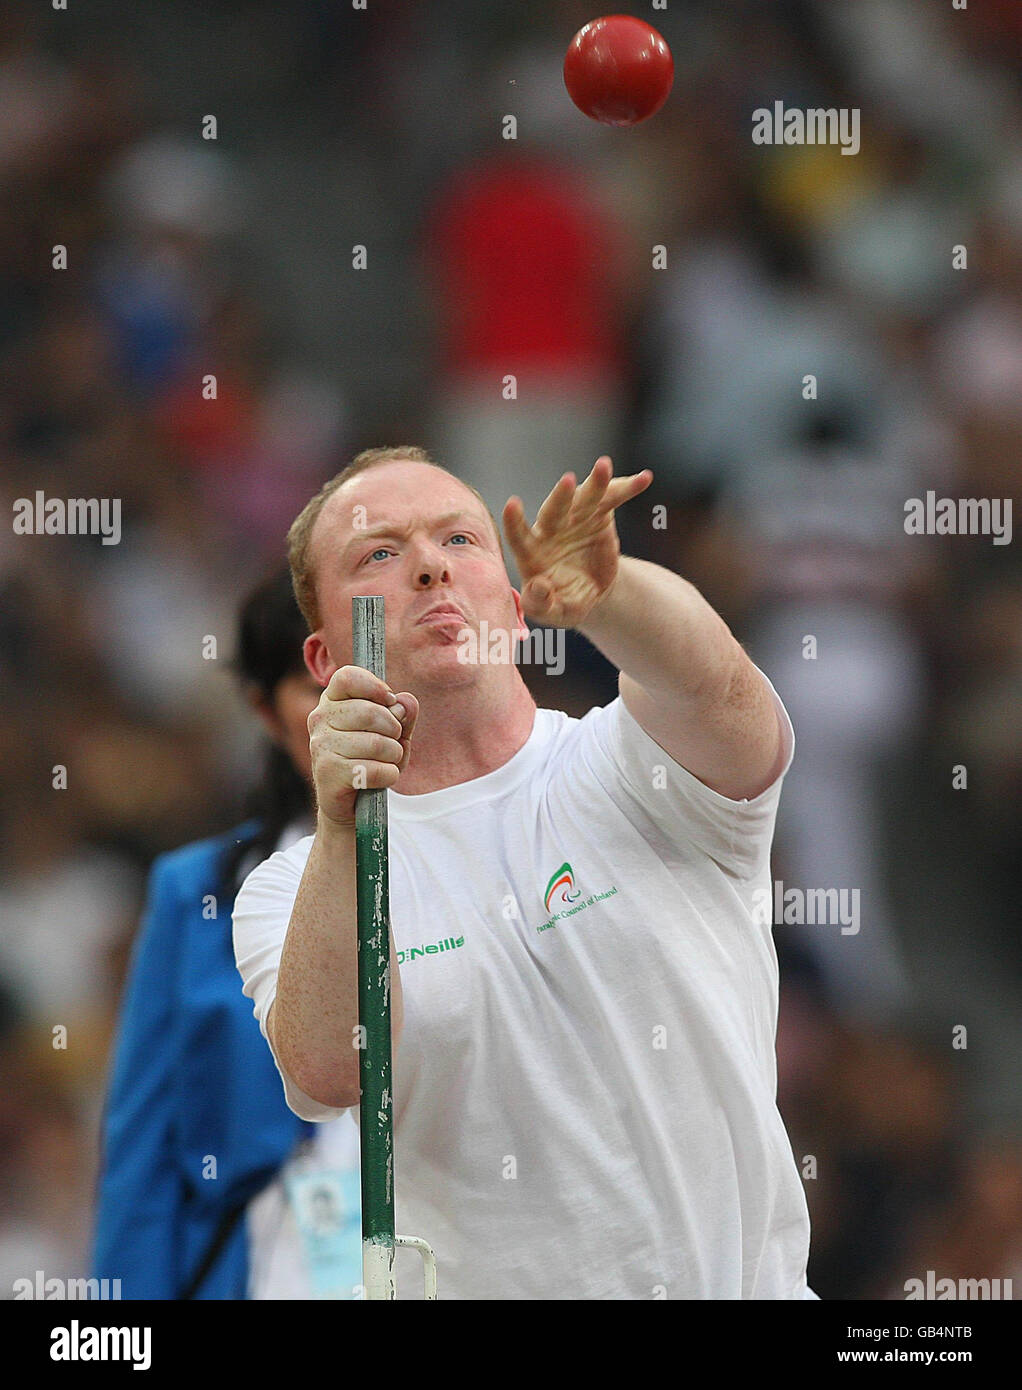 Paralympics - Beijing Paralympic Games 2008 - Day Two. Ireland's Thomas Cleare competing in the men's F32 Shot Putt at the Beijing Paralympic Games 2008 at the National Stadium, China. Stock Photo